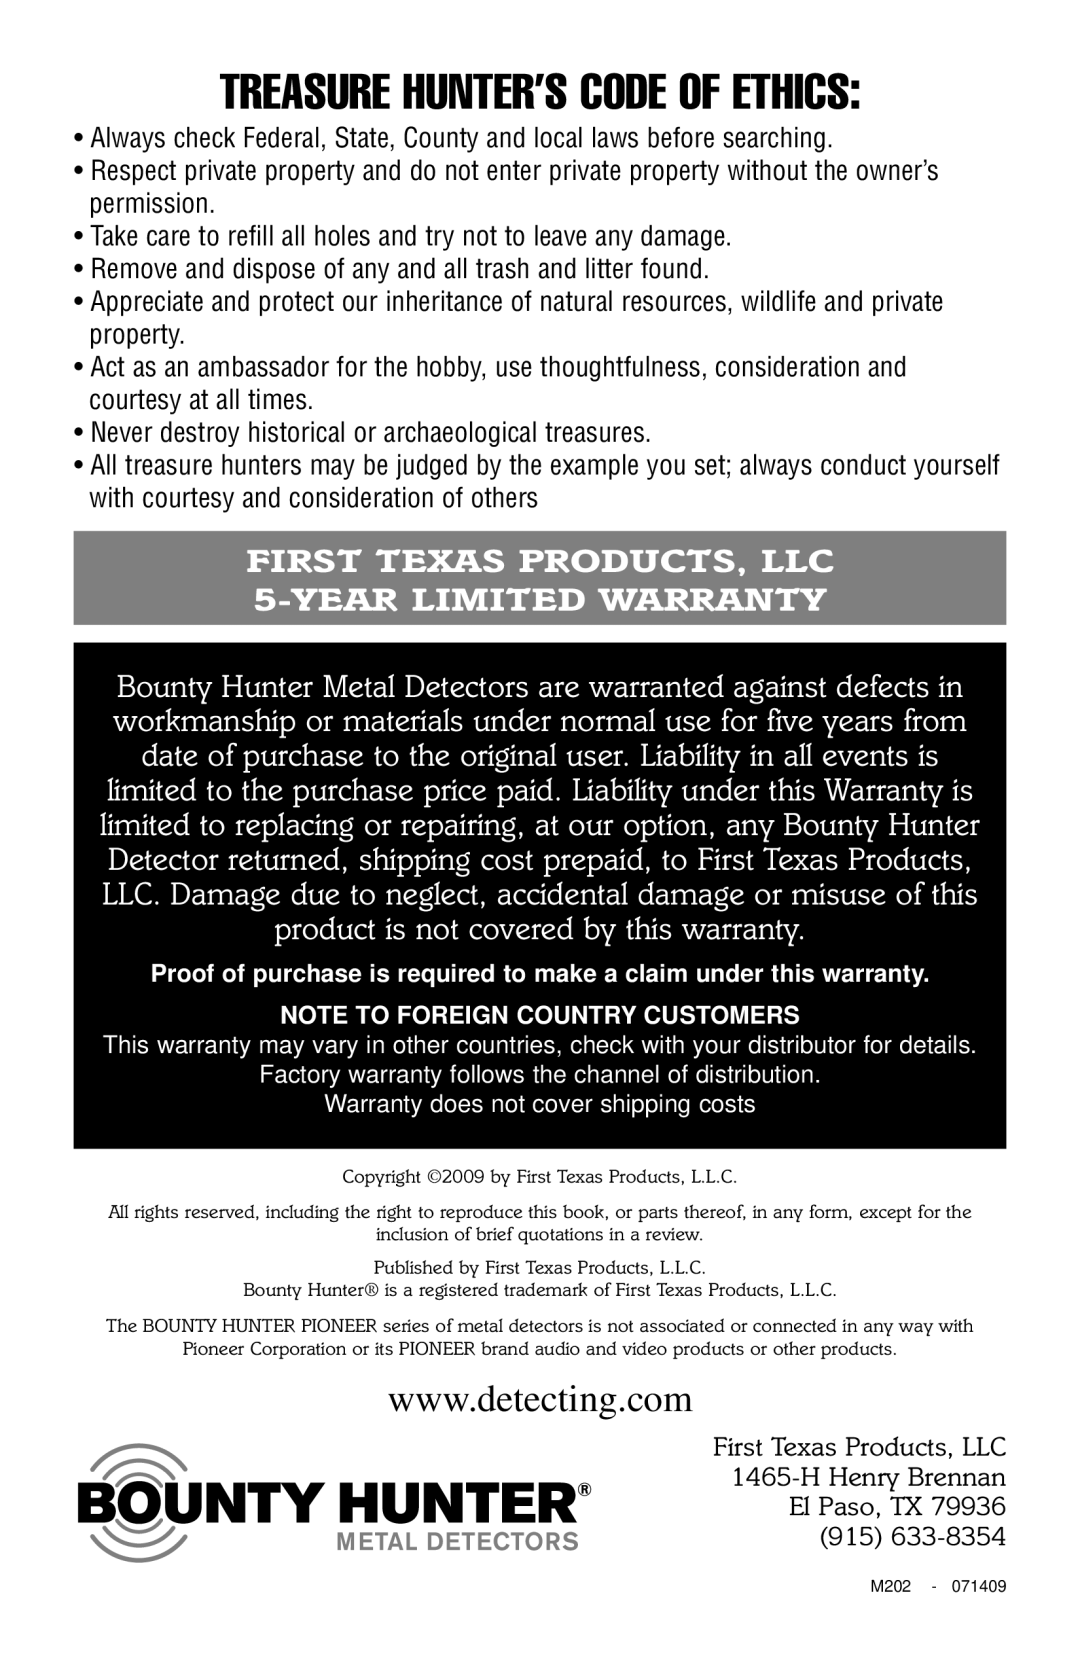 Bounty Hunter 202 owner manual Treasure Hunter’S Code Of Ethics, FIRST TEXAS PRODUCTS, LLC 5-YEAR LIMITED WARRANTY 